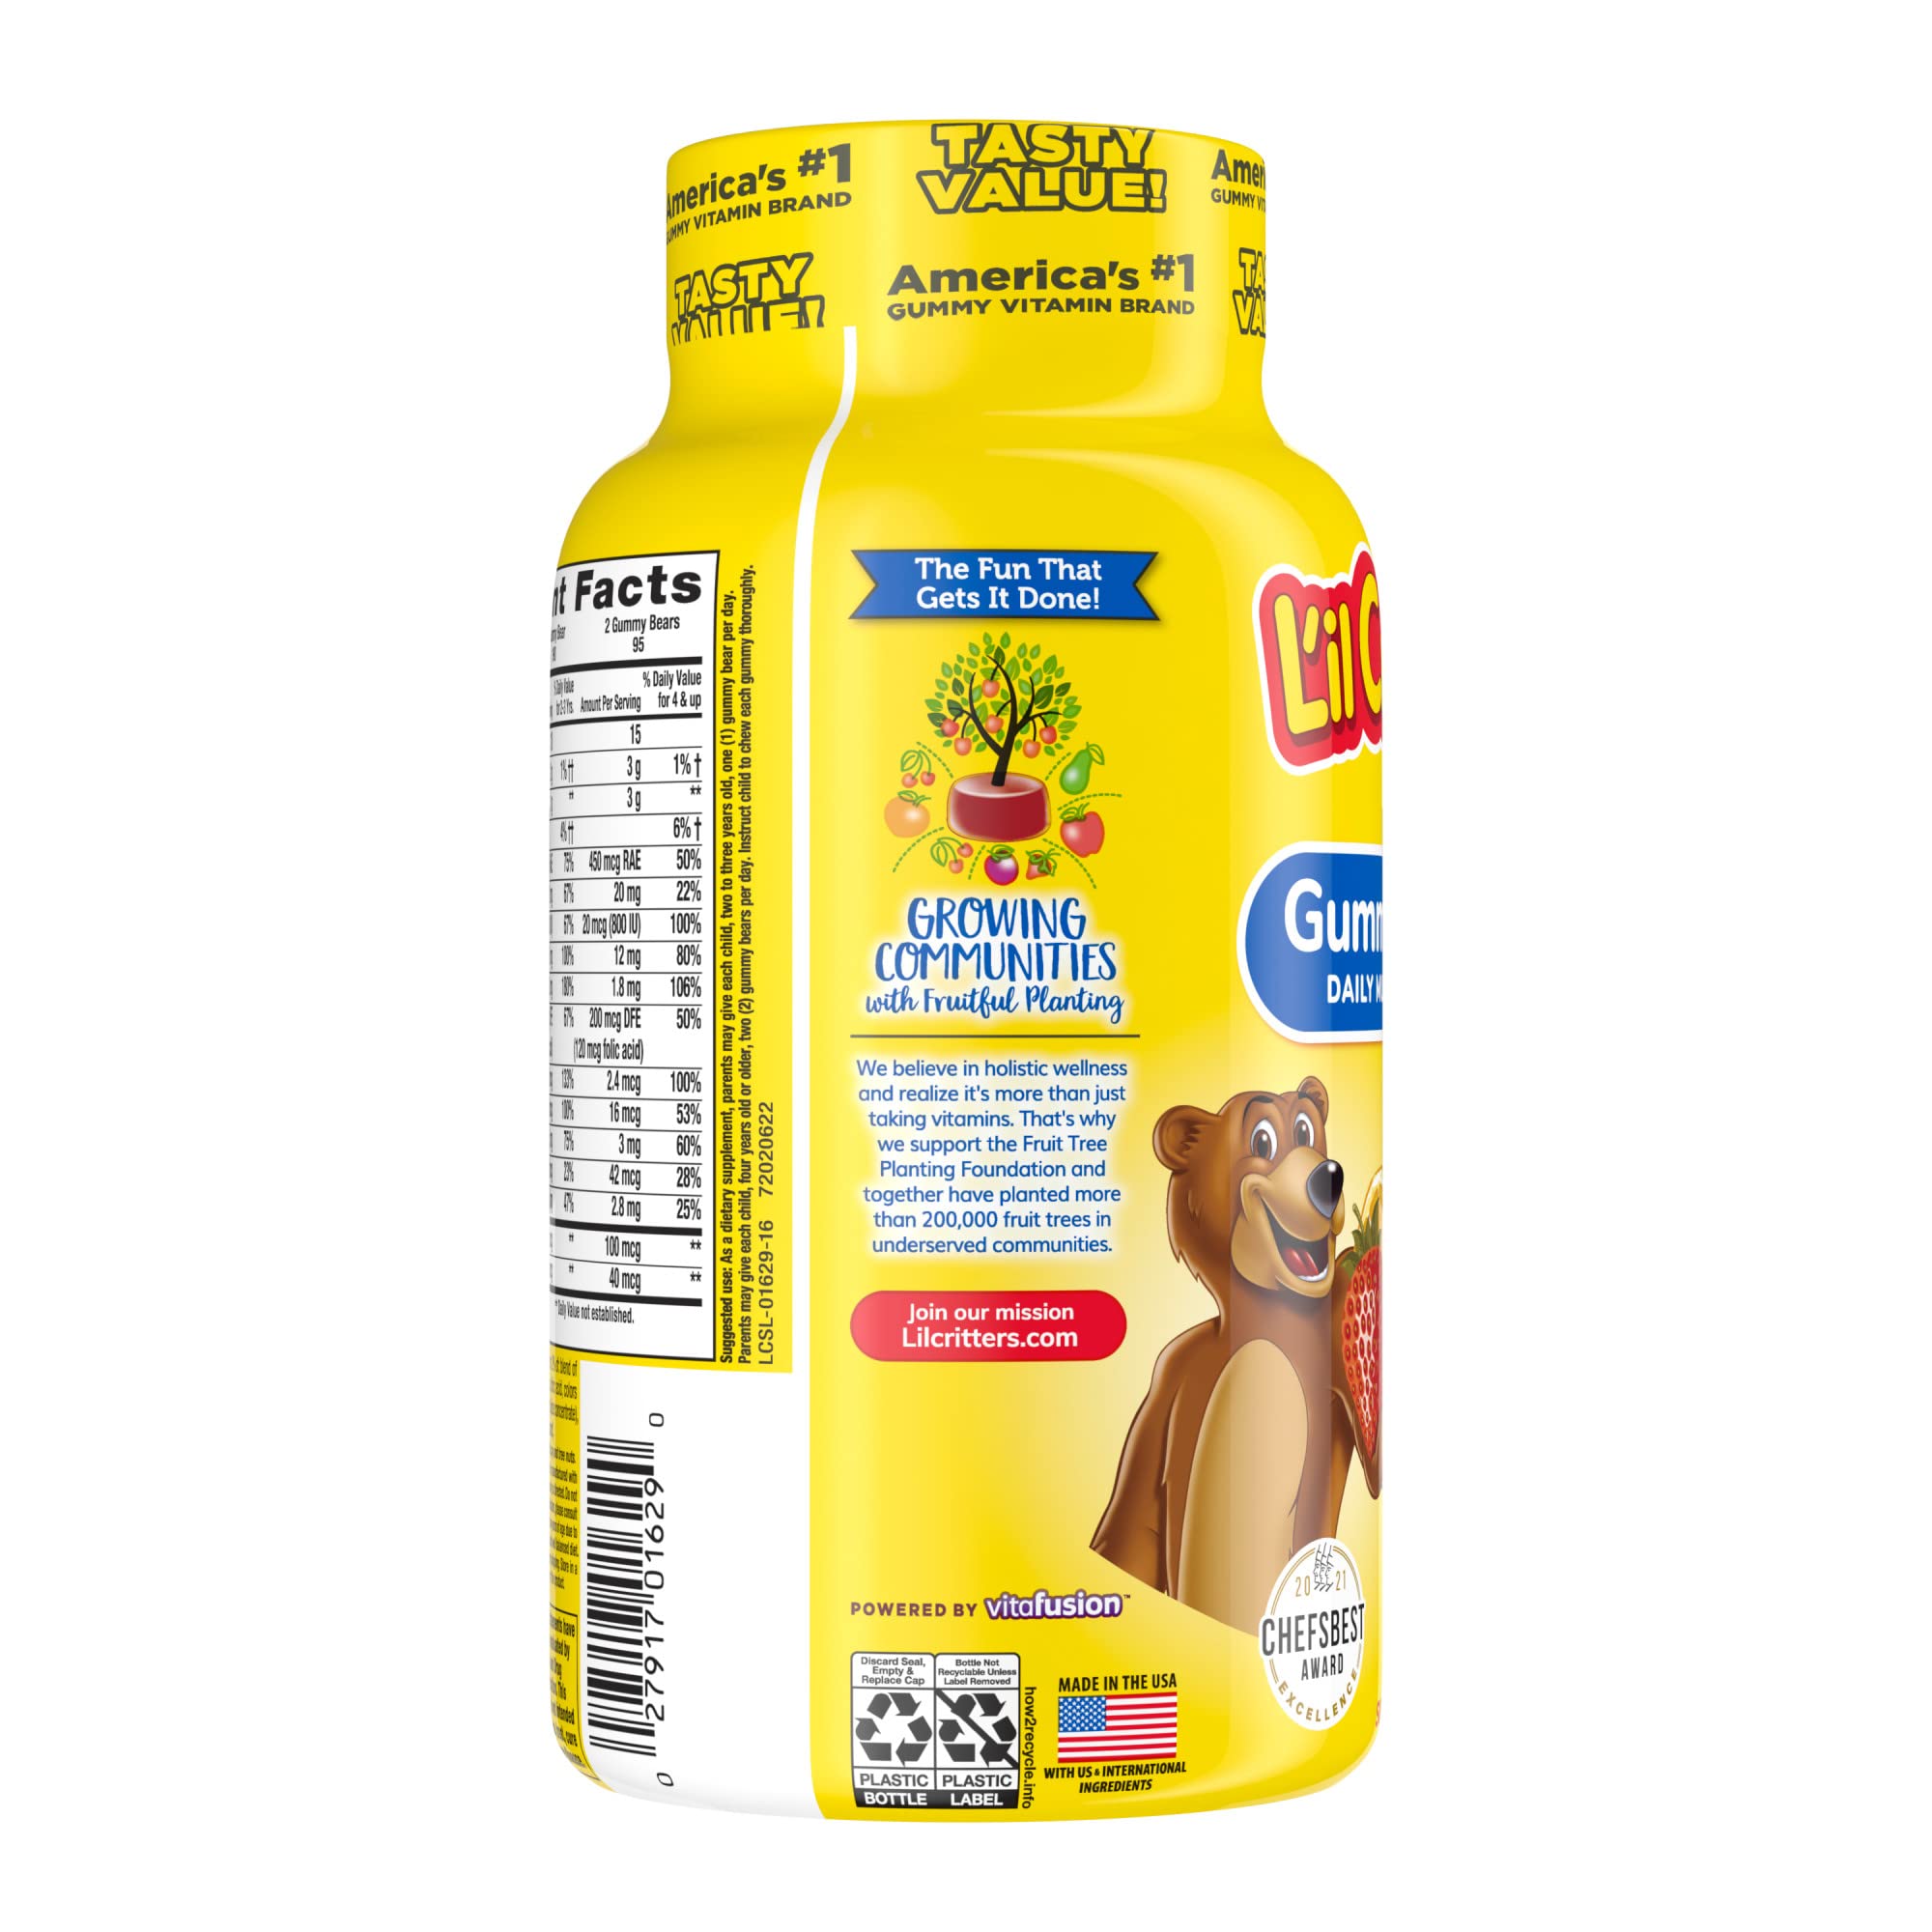 L'il Critters Gummy Vites Daily multivitamin: Vitamins C, D3 and Zinc for Immune Support 190 ct (95-190 day supply), 5 delicious flavors from America’s number one Kids Gummy Vitamin Brand